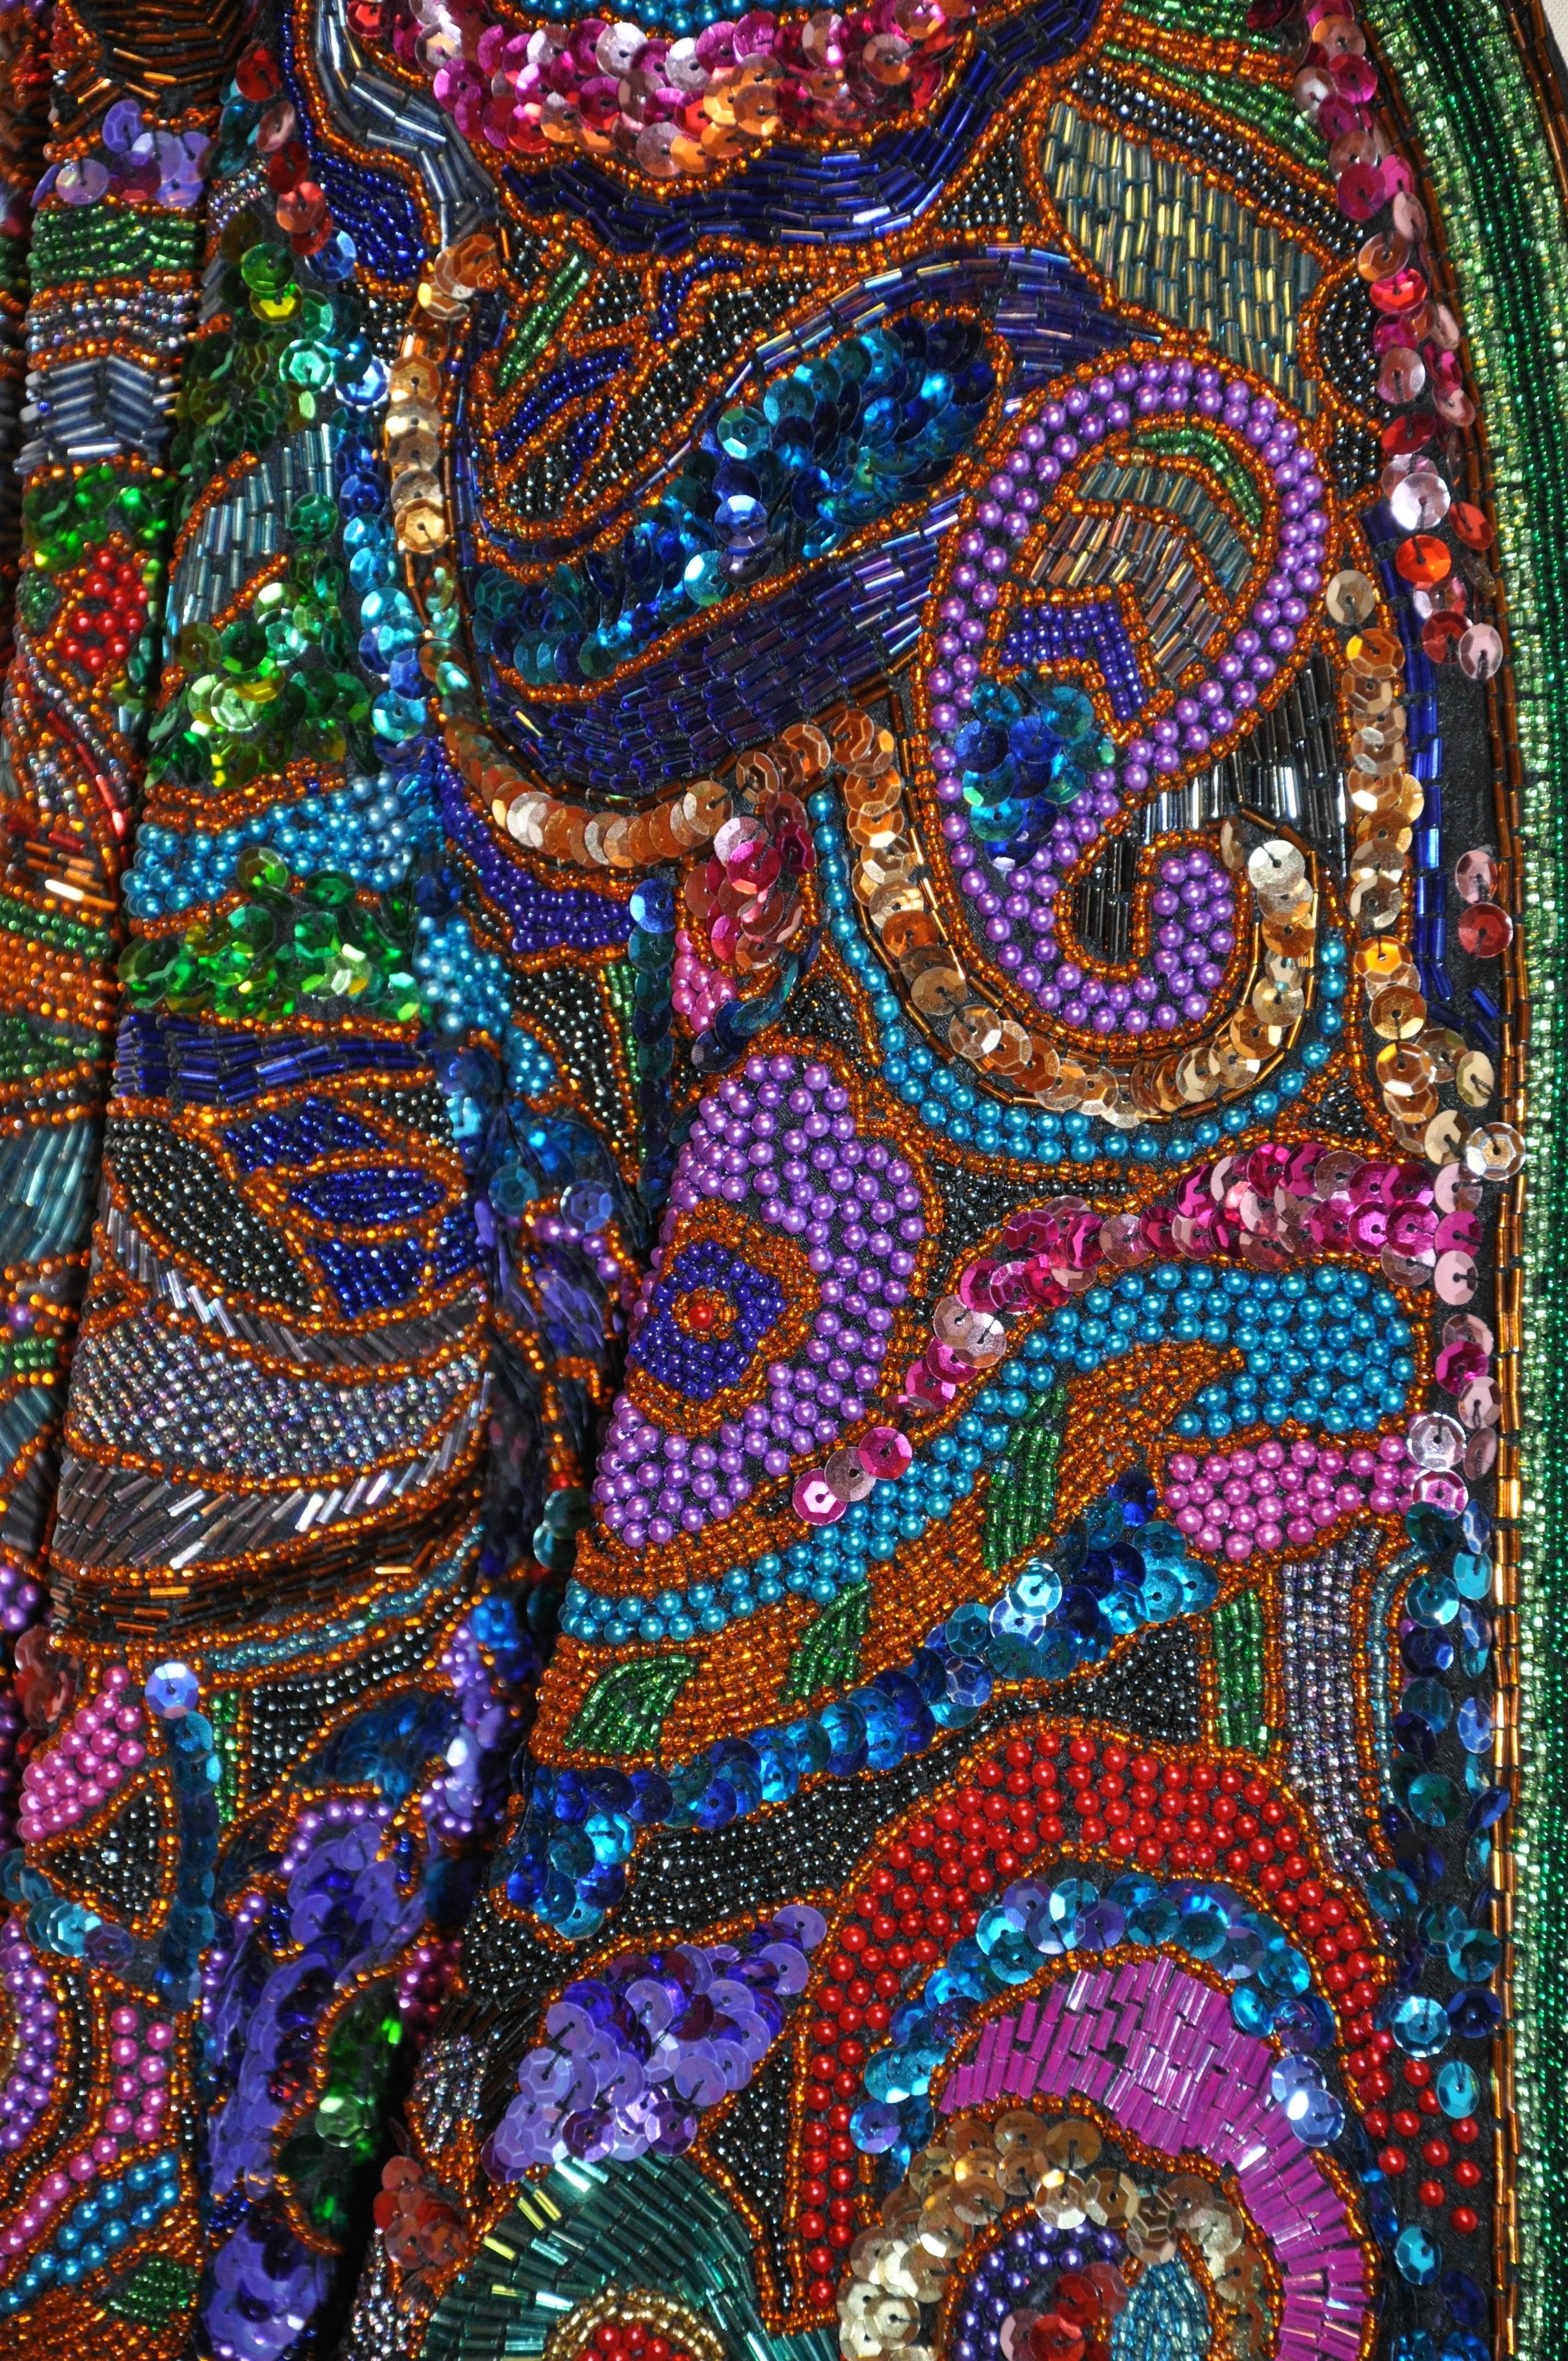         Diane Frez's wonderfully detailed evening open jacket with multi-colors of multi-beaded micro combinations of pearls, bugle and seed bead work accented with micro sequins and textures makes for quite an elegant evening jacket. The shoulder